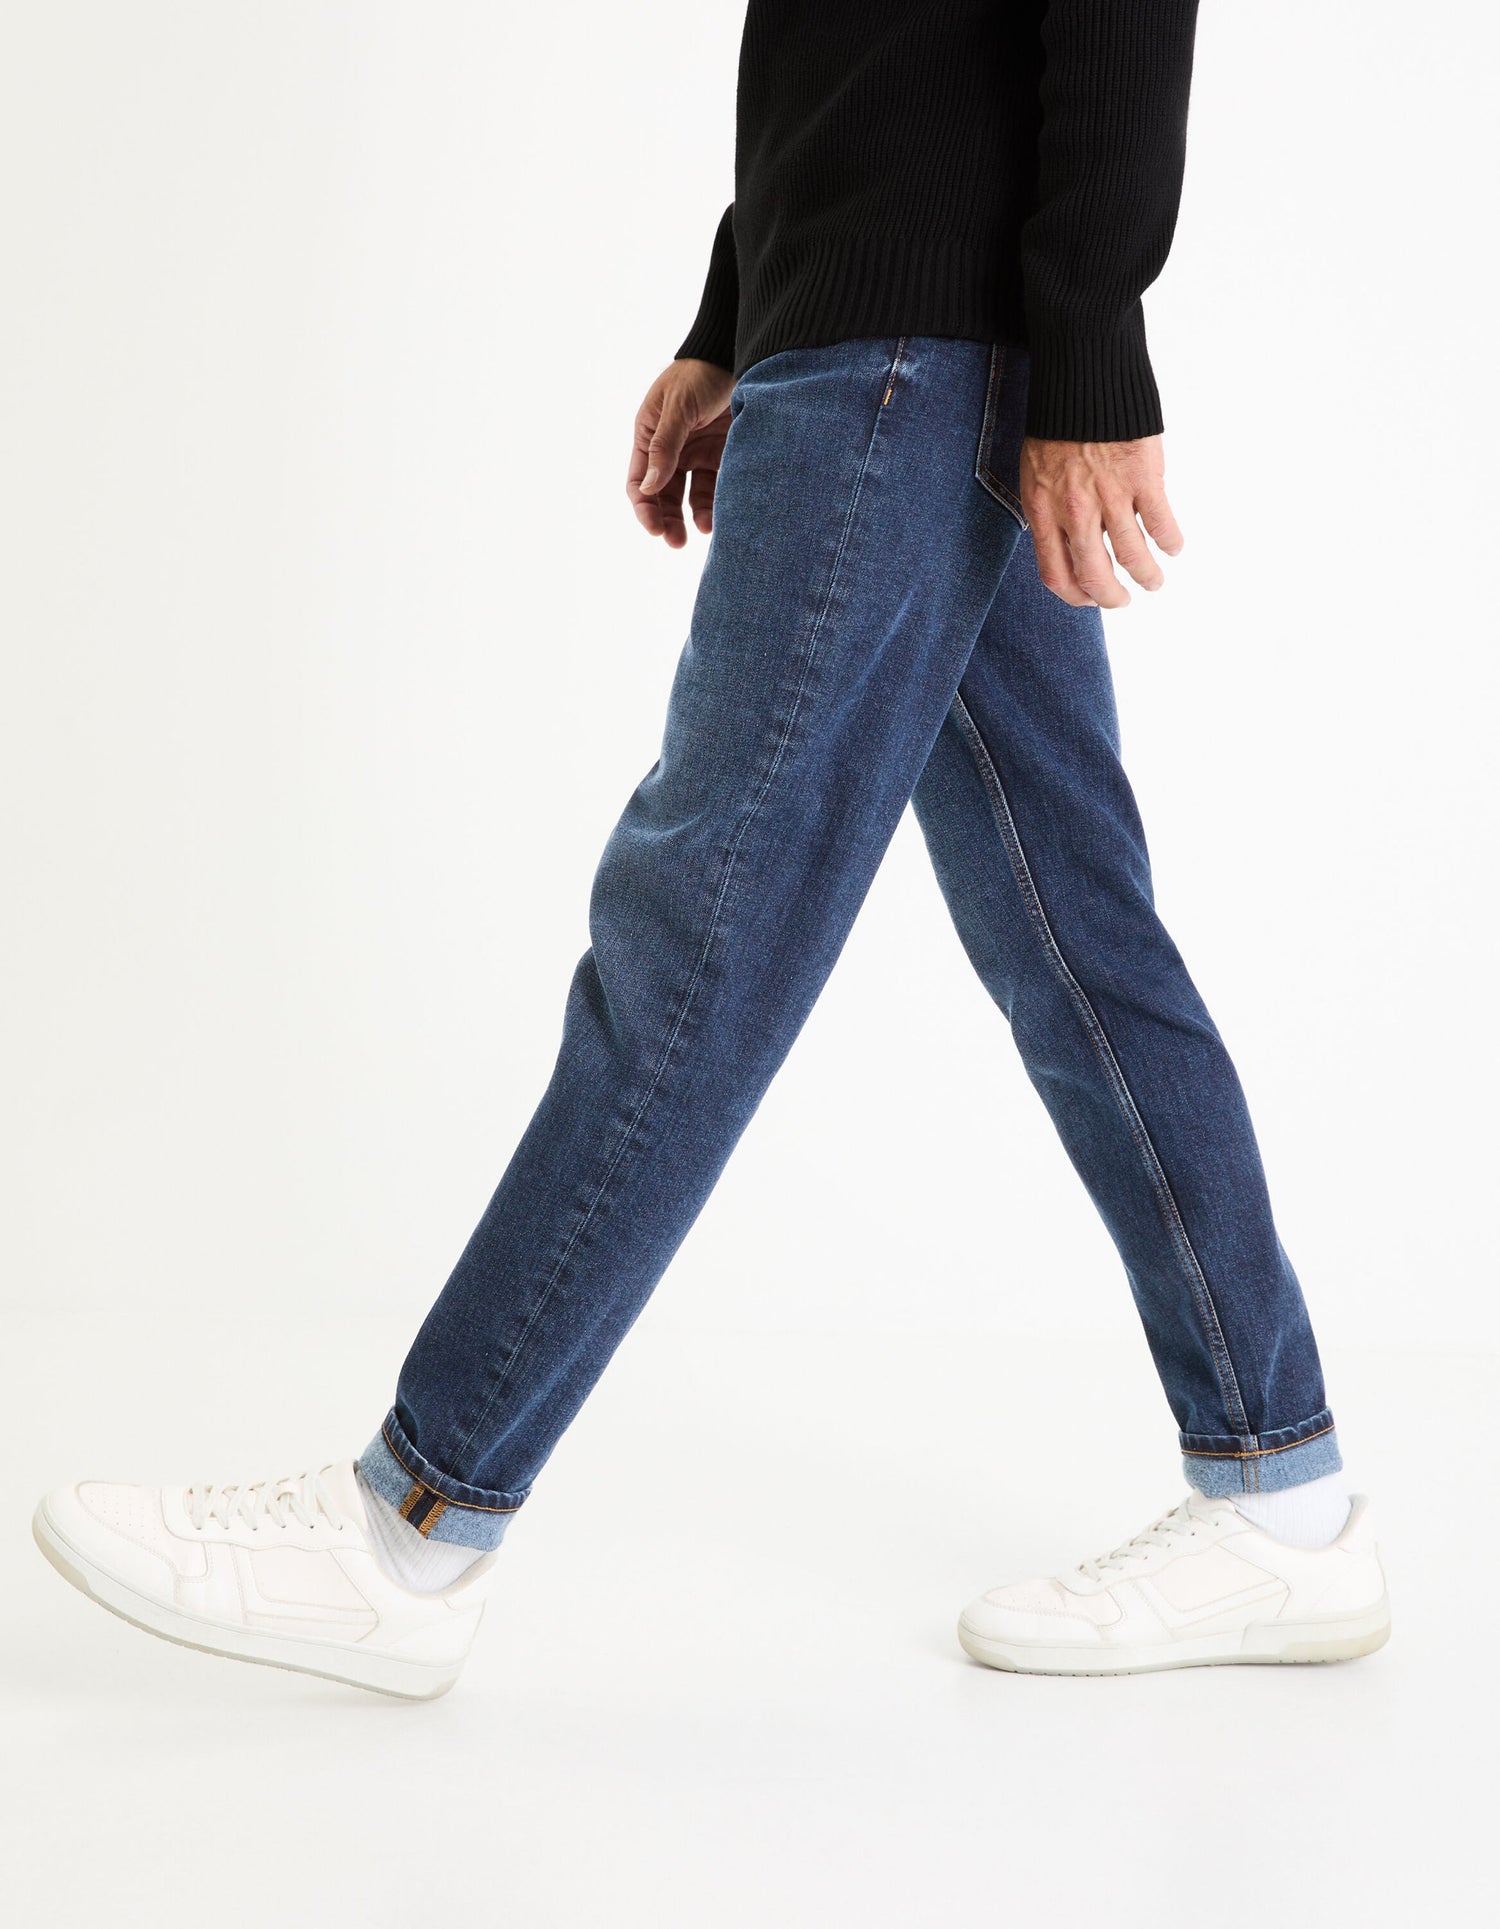 Thermolite® Slim C25 Stretch Jeans_FOTHERM_DOUBLE STONE_05